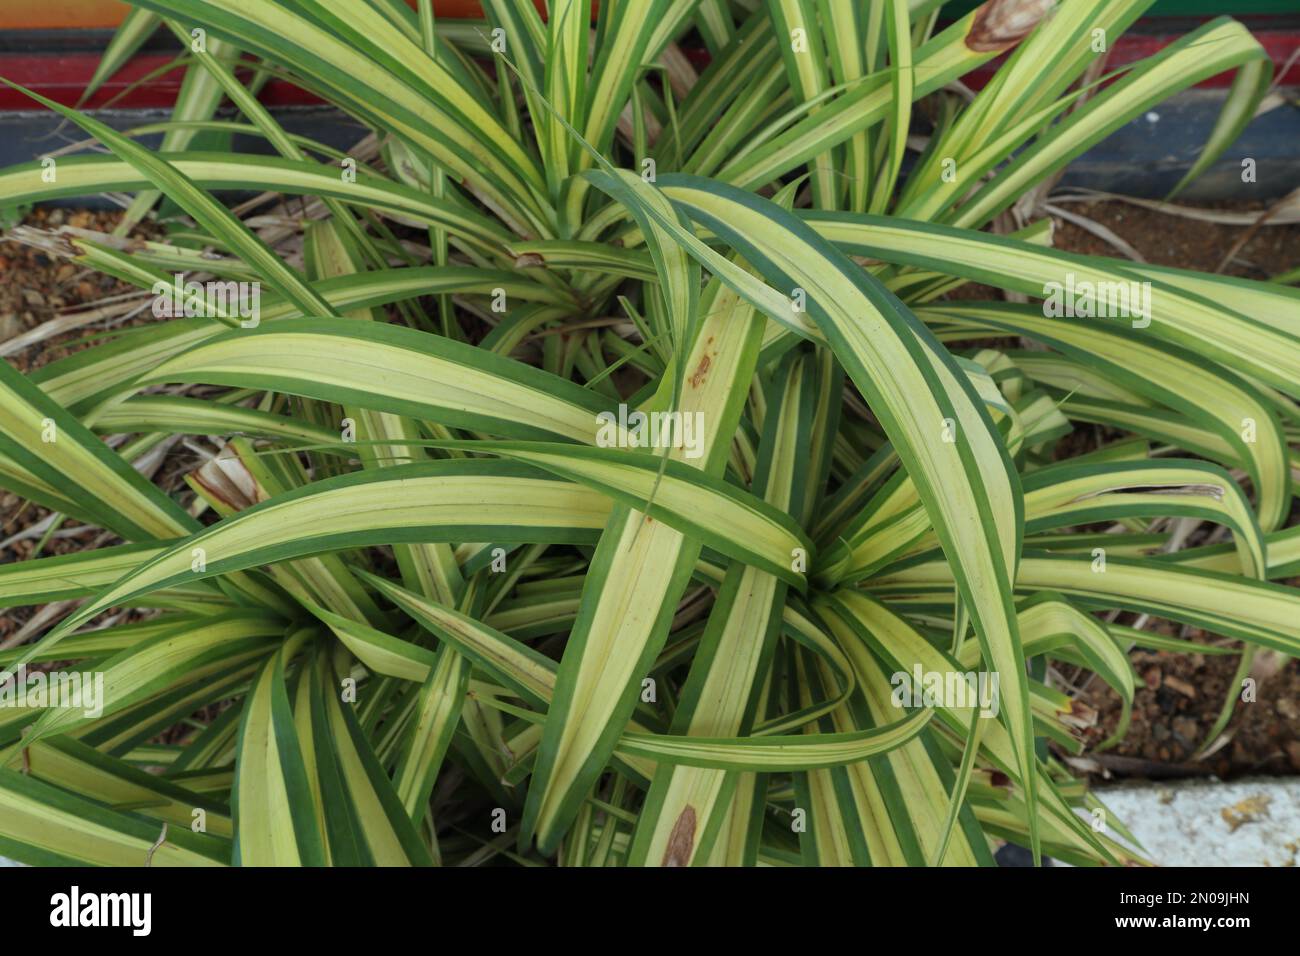 A green and yellow variegated leaf plant known as the Pandanus Variegata in the garden Stock Photo